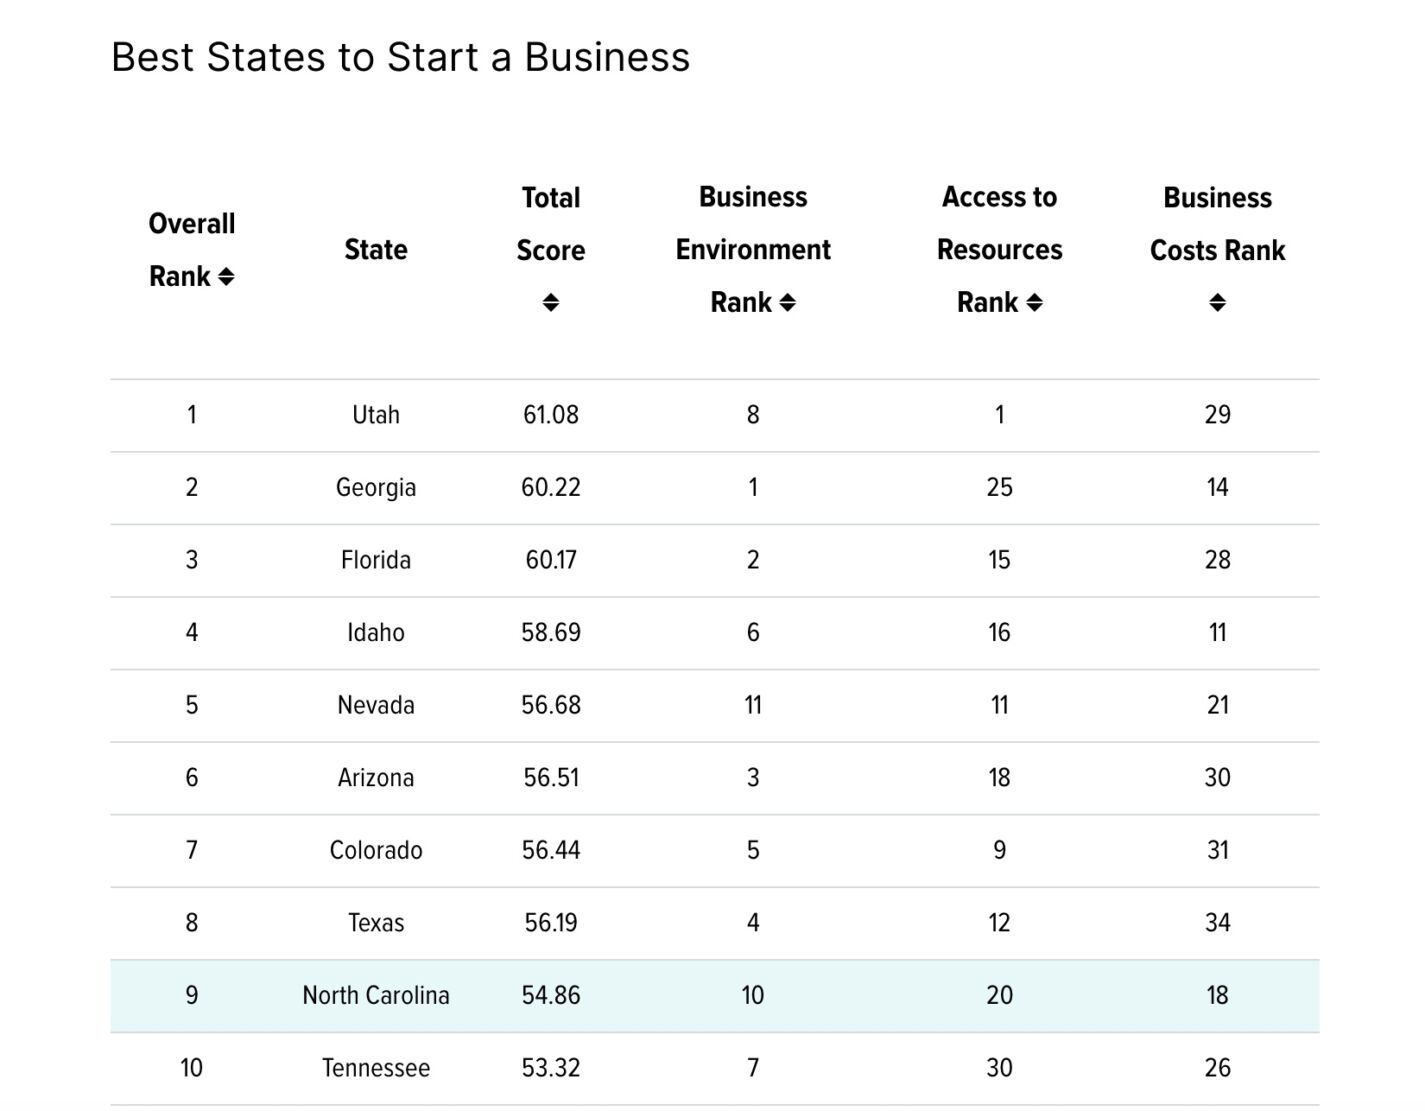 NC ranked ninth best state to start a business